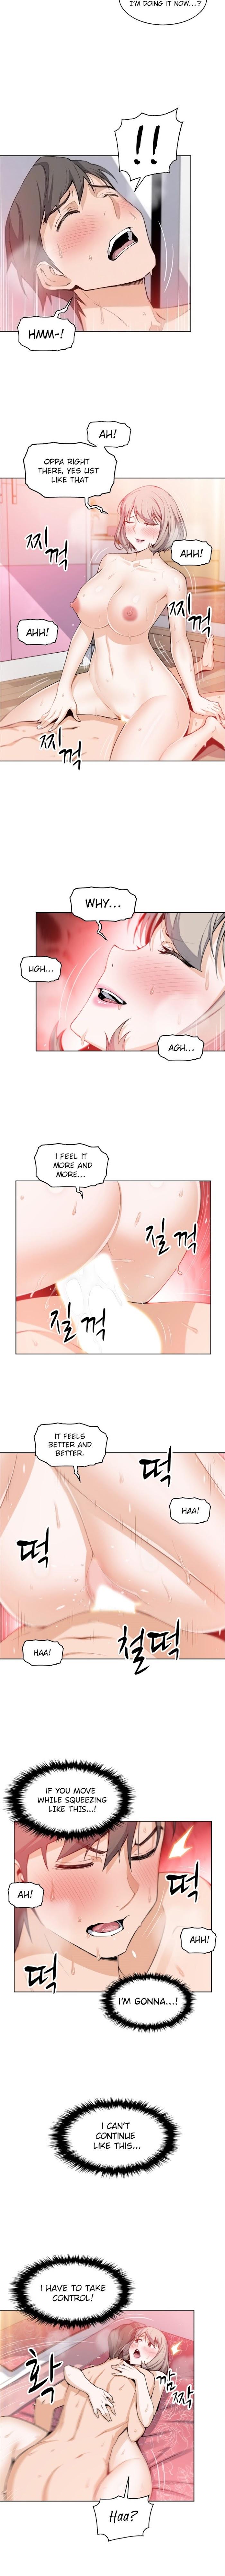 Housekeeper [Neck Pillow, Paper] Ch.49/49 [English] [Manhwa PDF] Completed 178